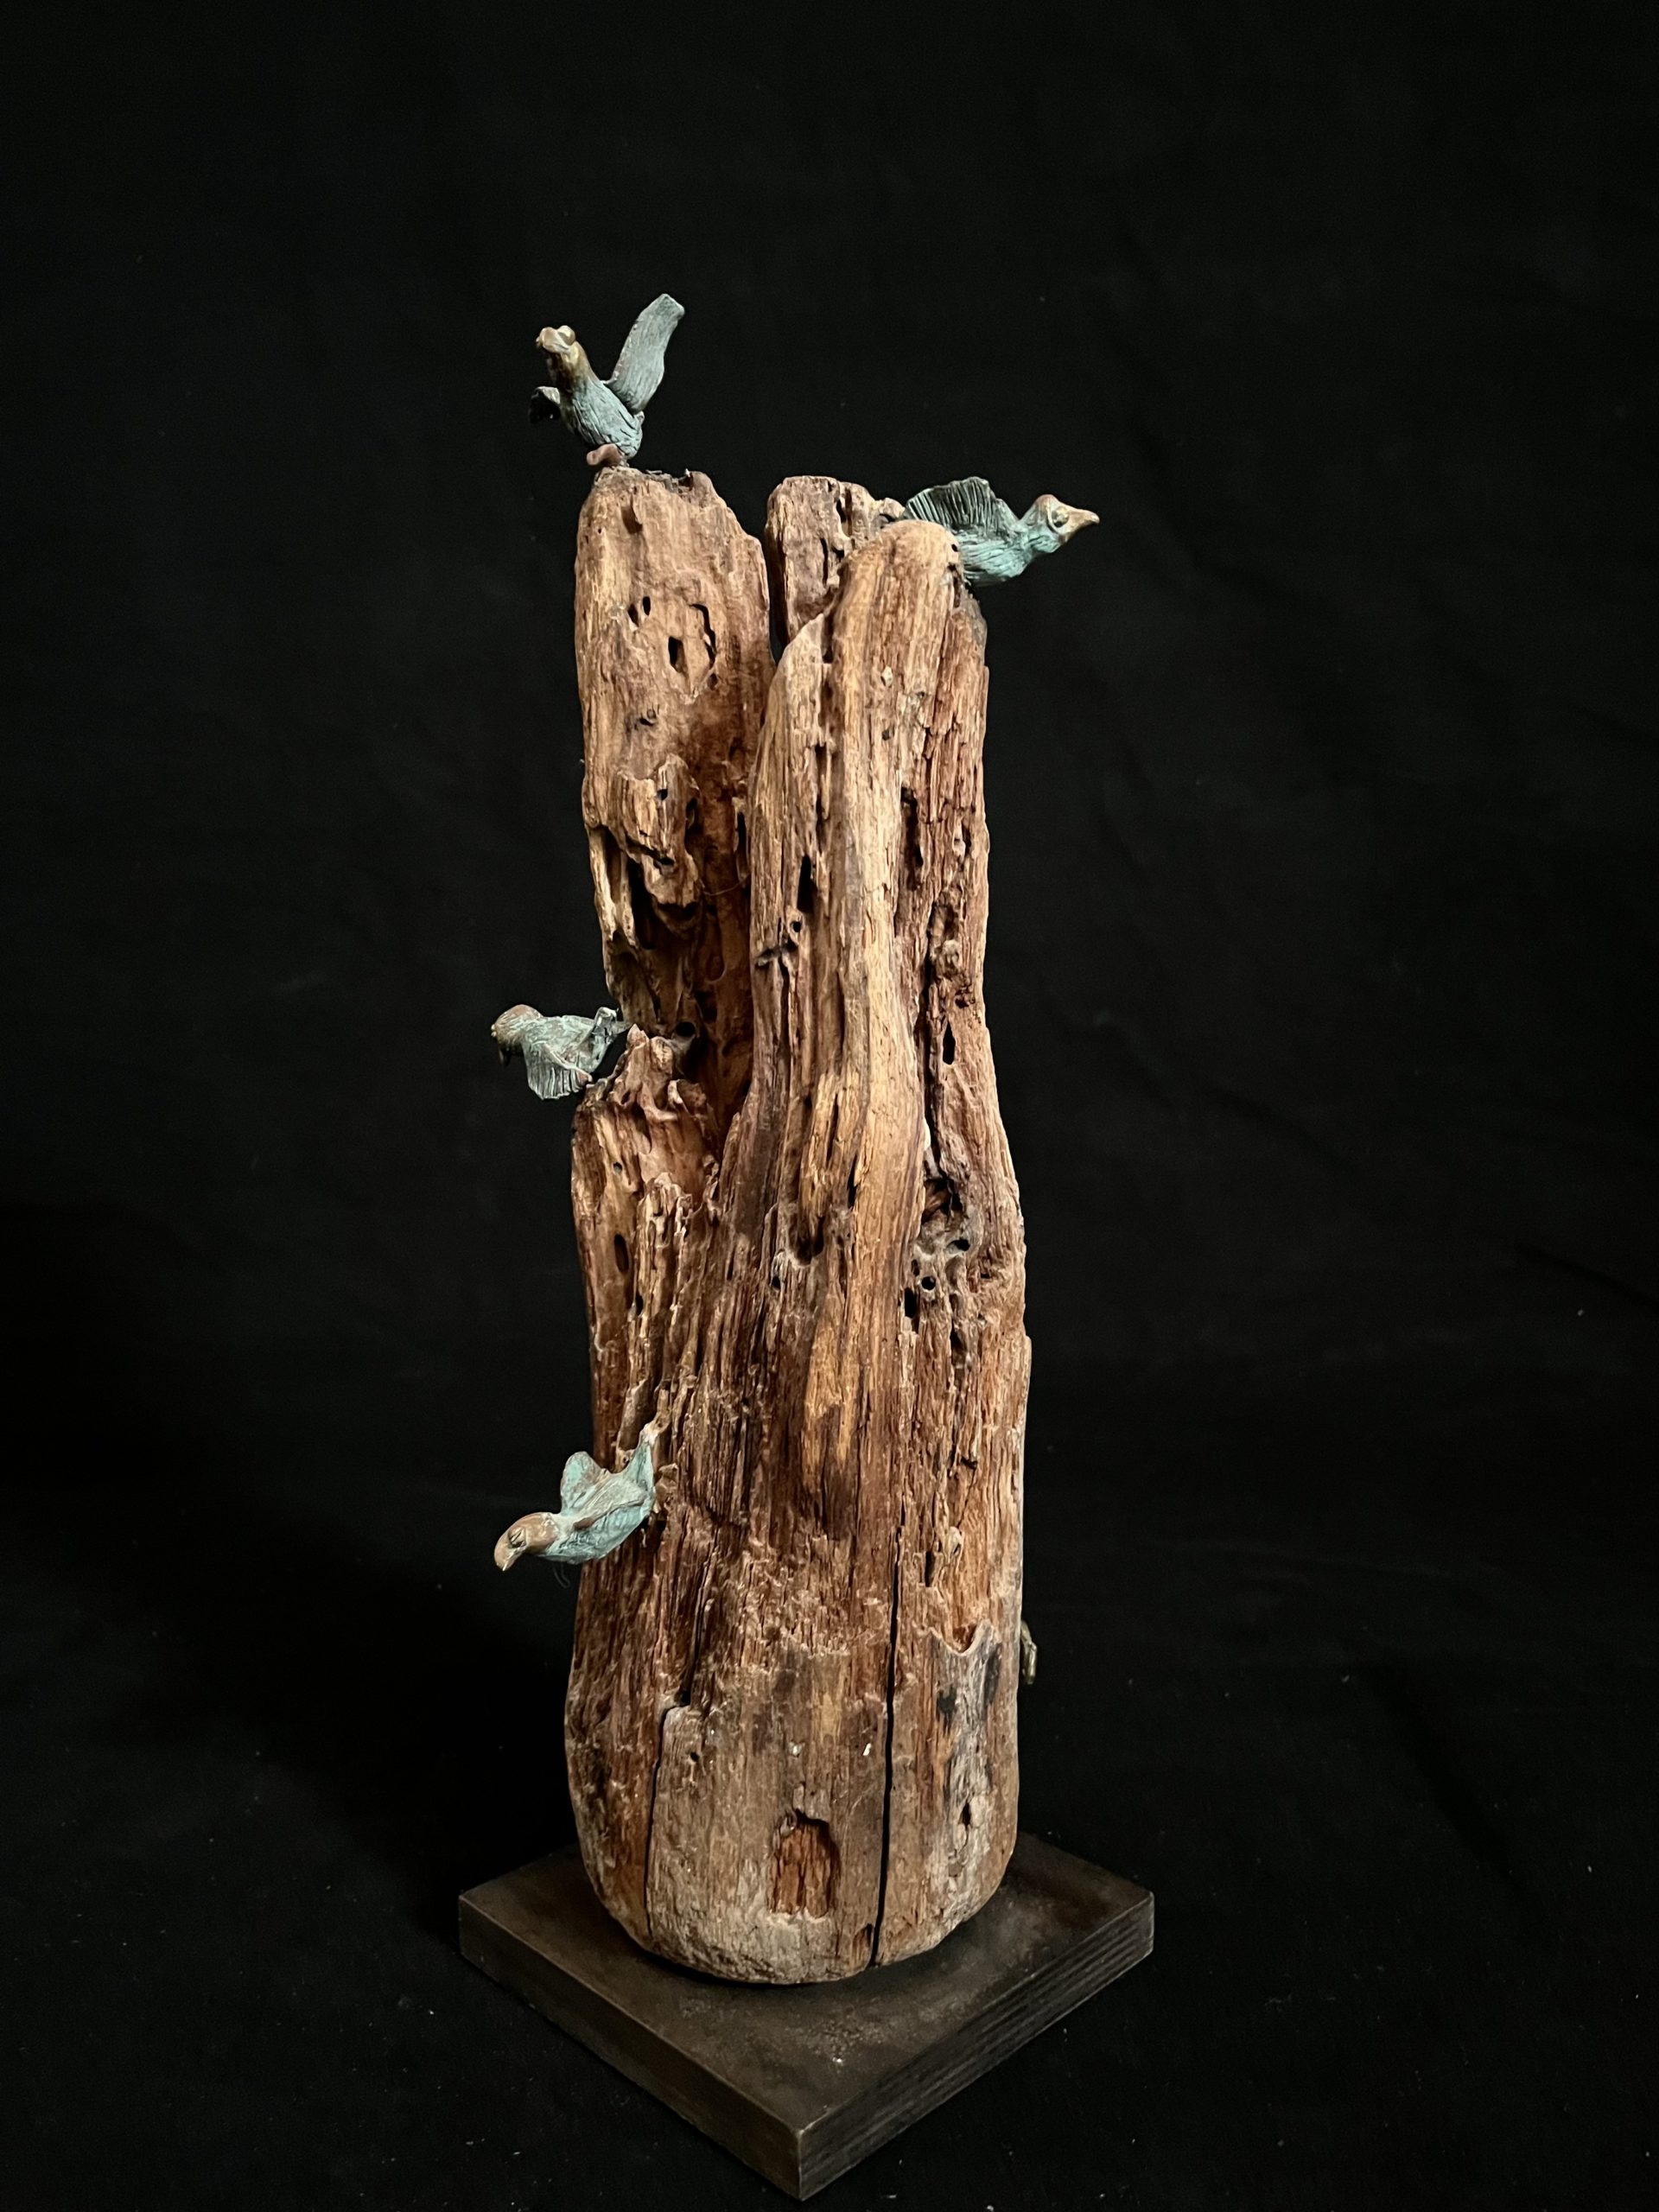 Escale / Stopover, 2018 - wood and bronze sculpture by Francoise Mayeras